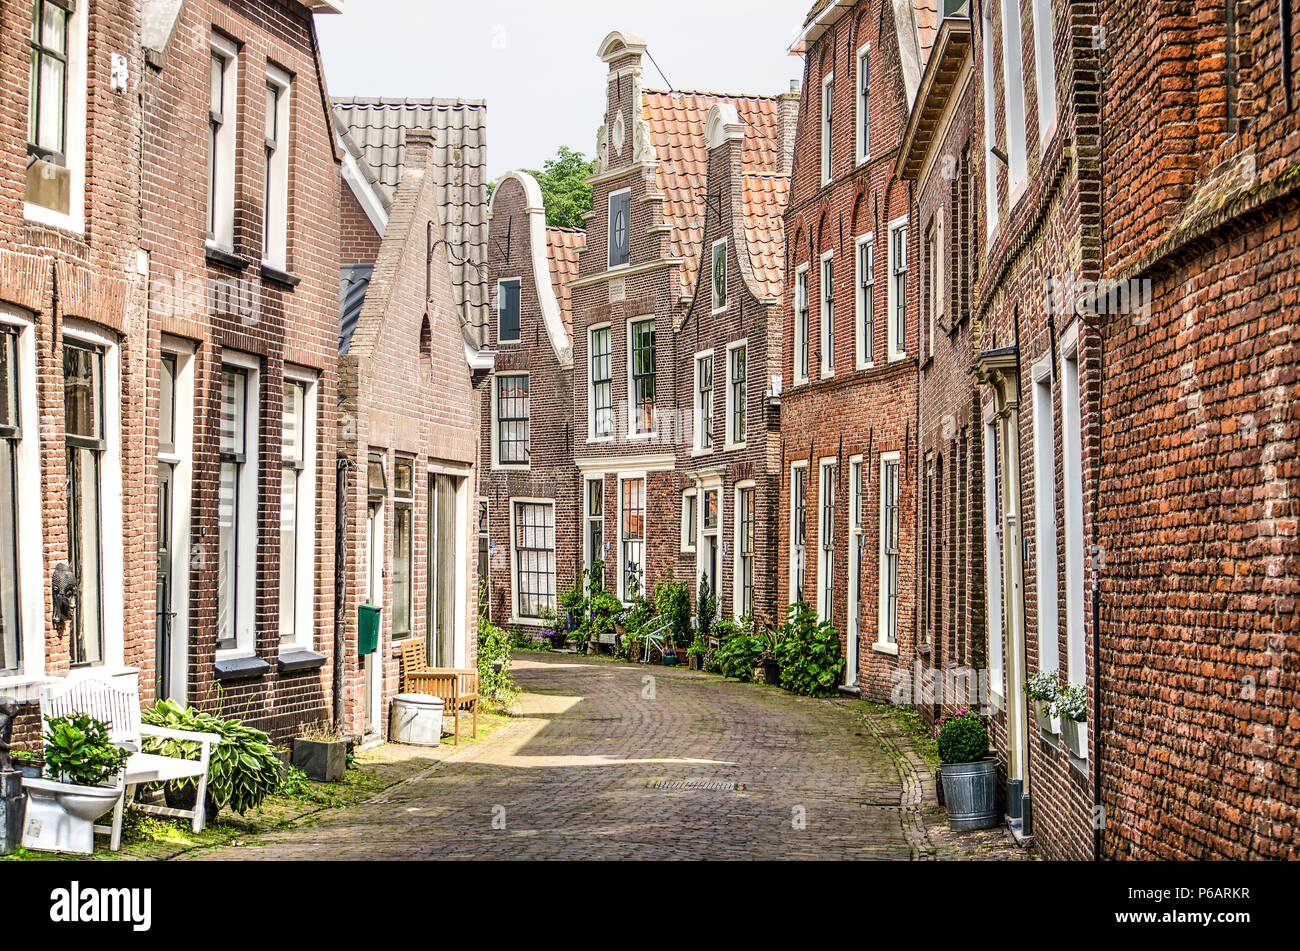 Blokzijl, The Netherlands, June 9, 2018: well-preserved ancient houses in Kerkstraat in the old town Stock Photo